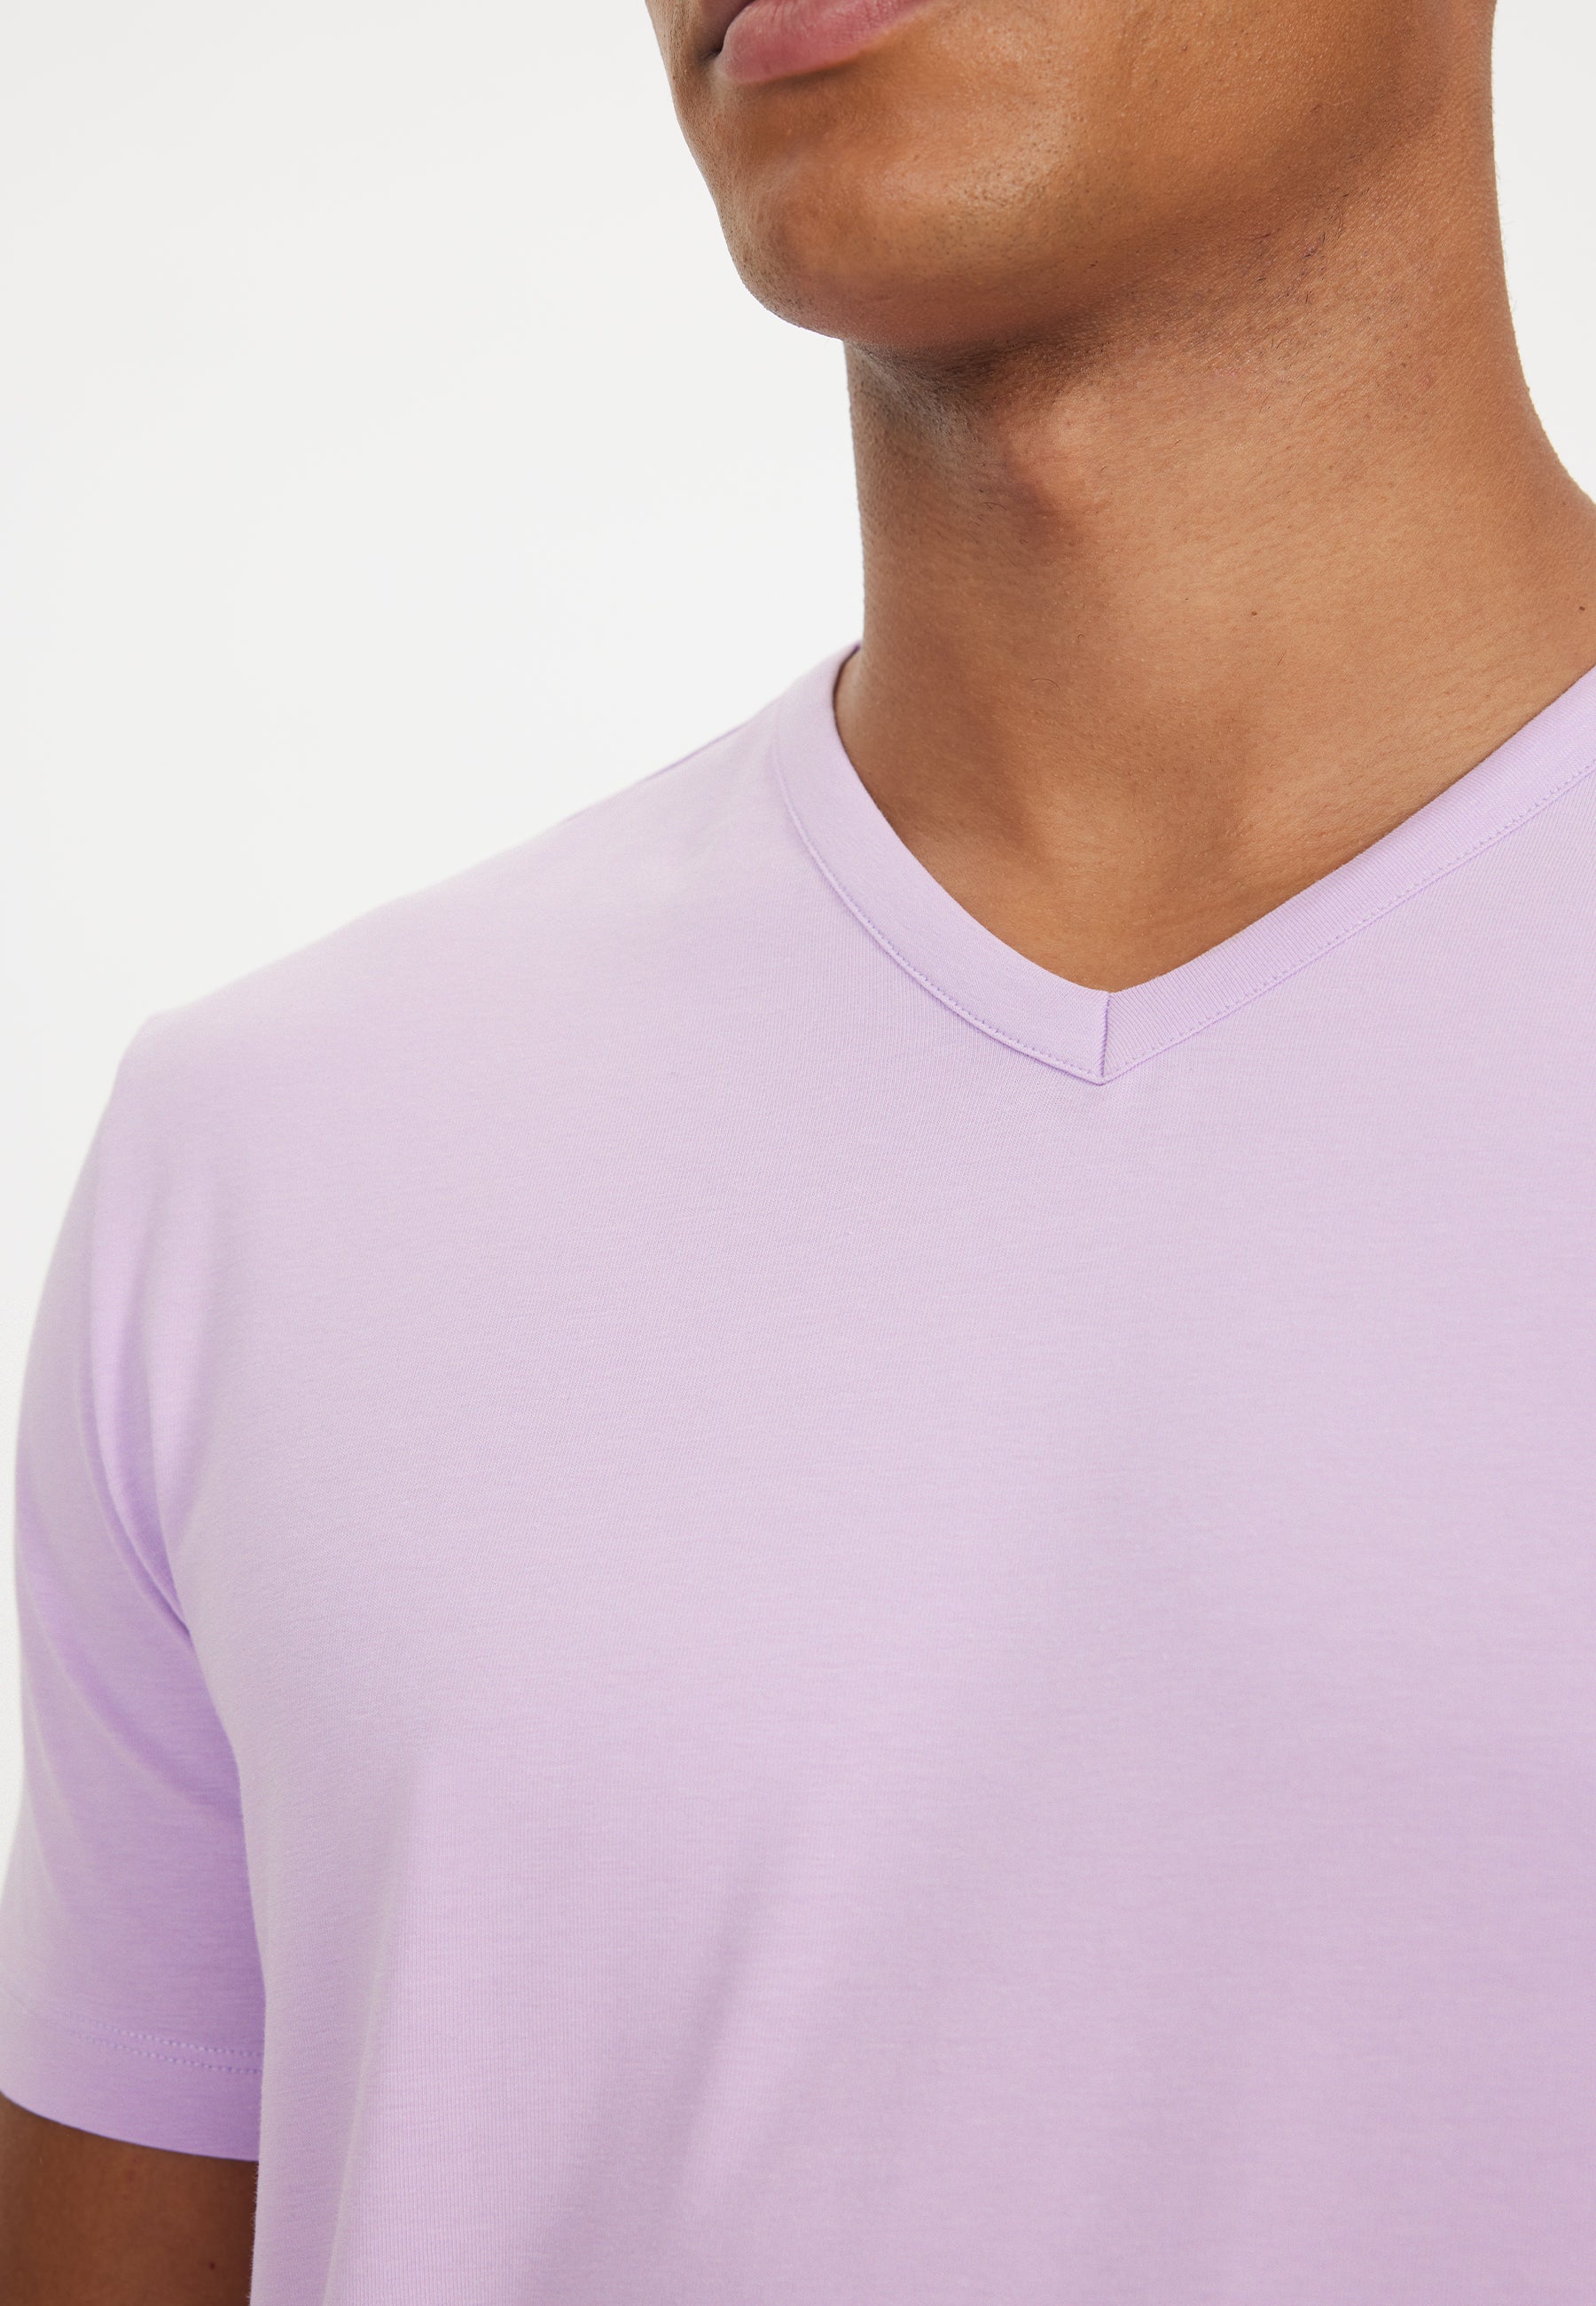 THEO V-NECK TEE in Lilac